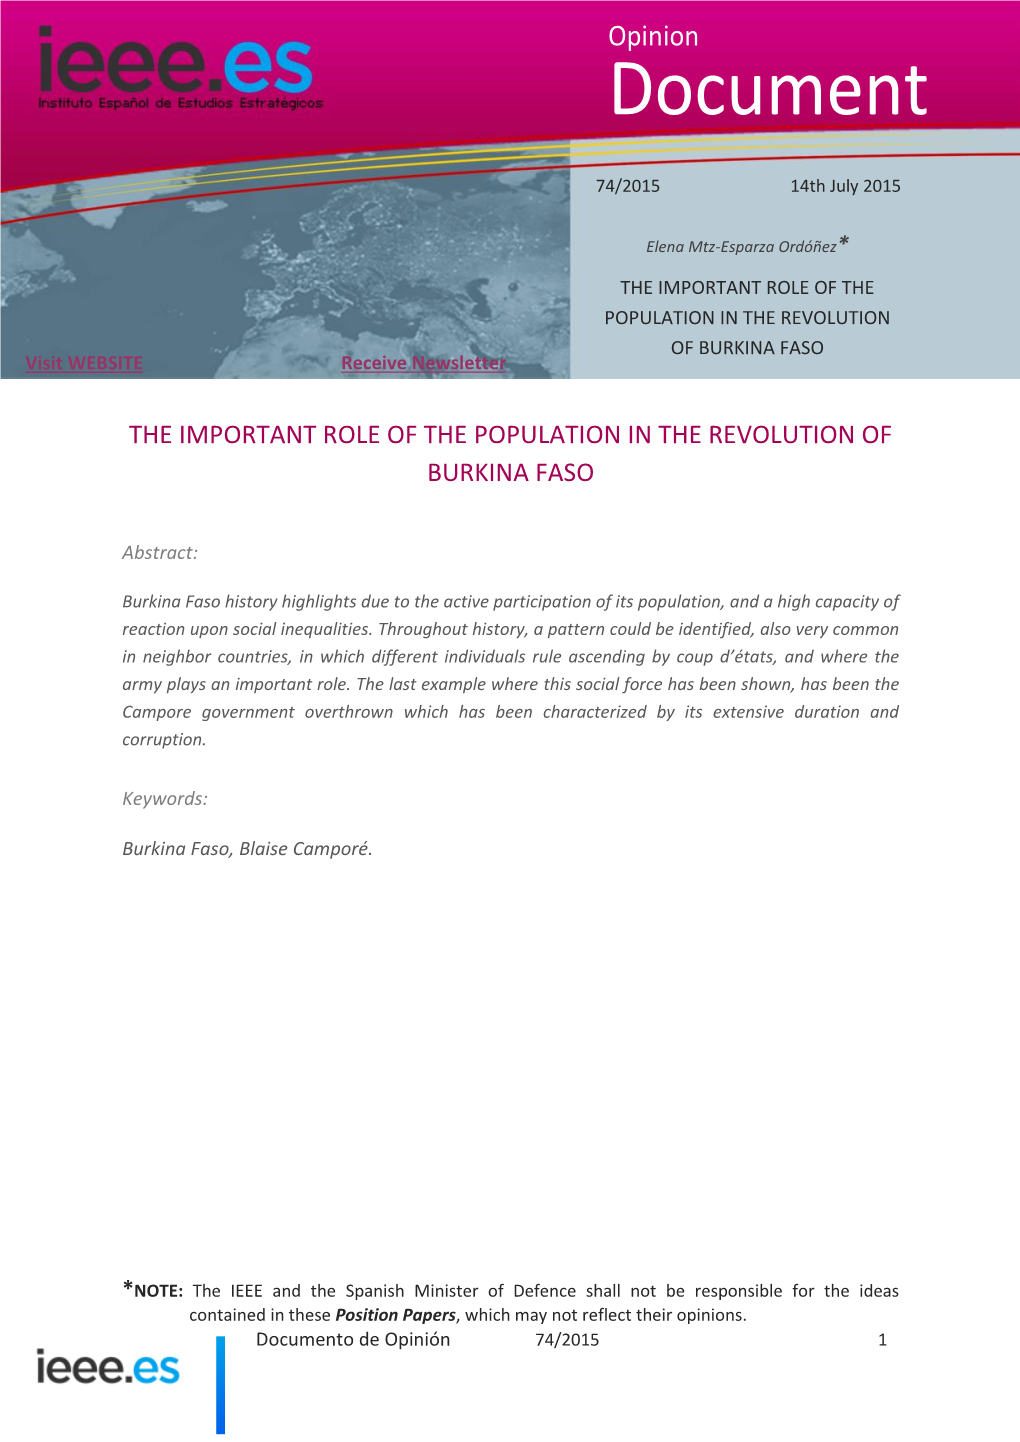 The Important Role of the Population Im the Revolution Burkina Faso